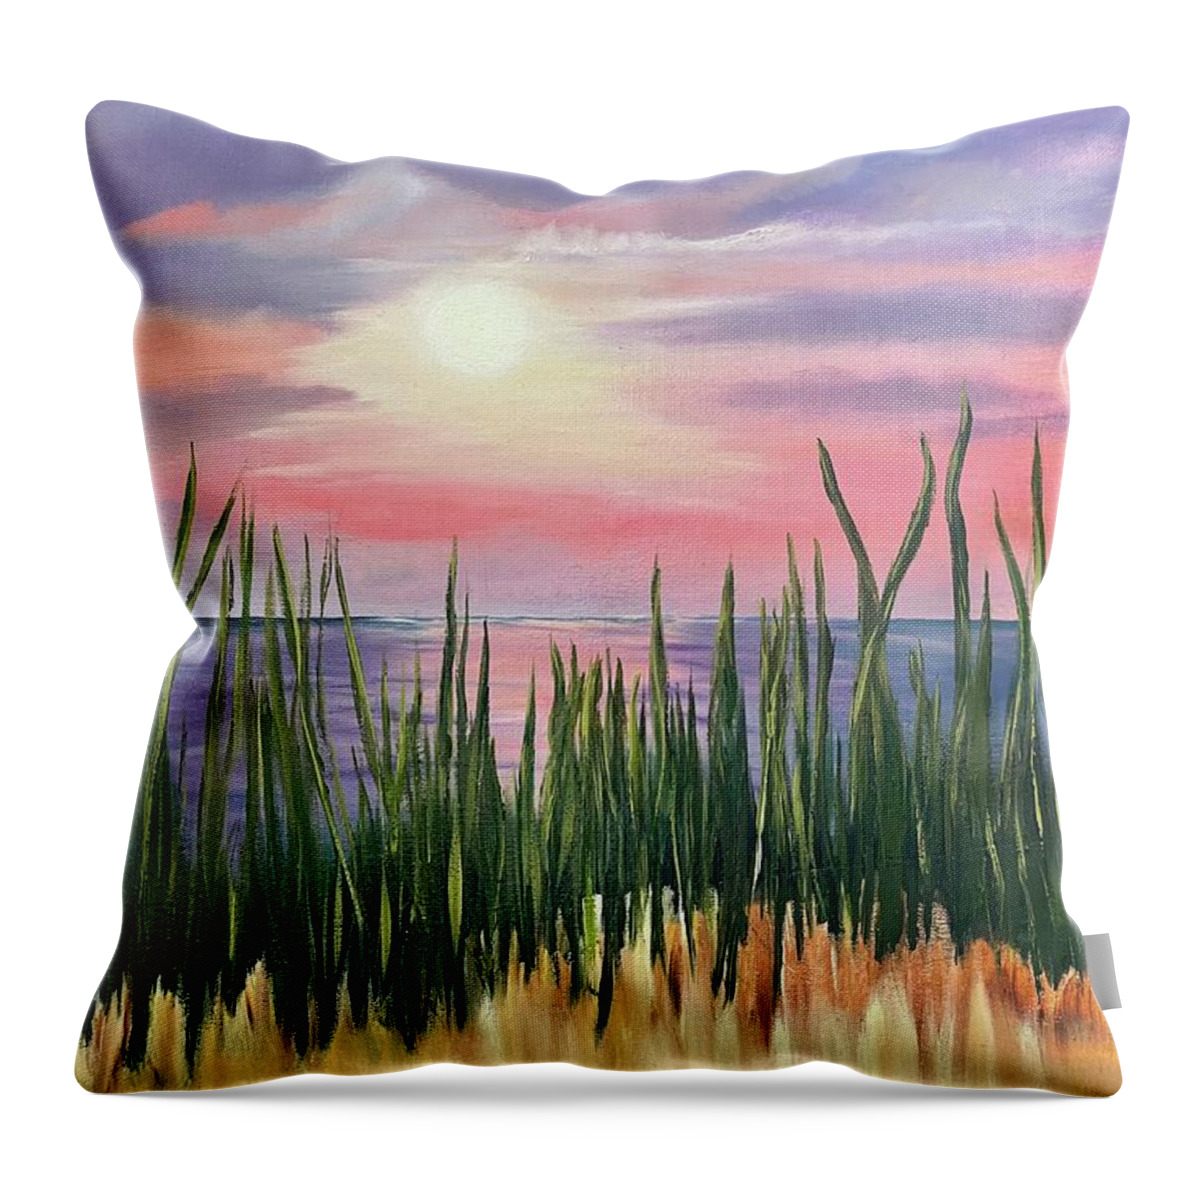 Sunset Throw Pillow featuring the painting Sunset At The Curve by Lisa White